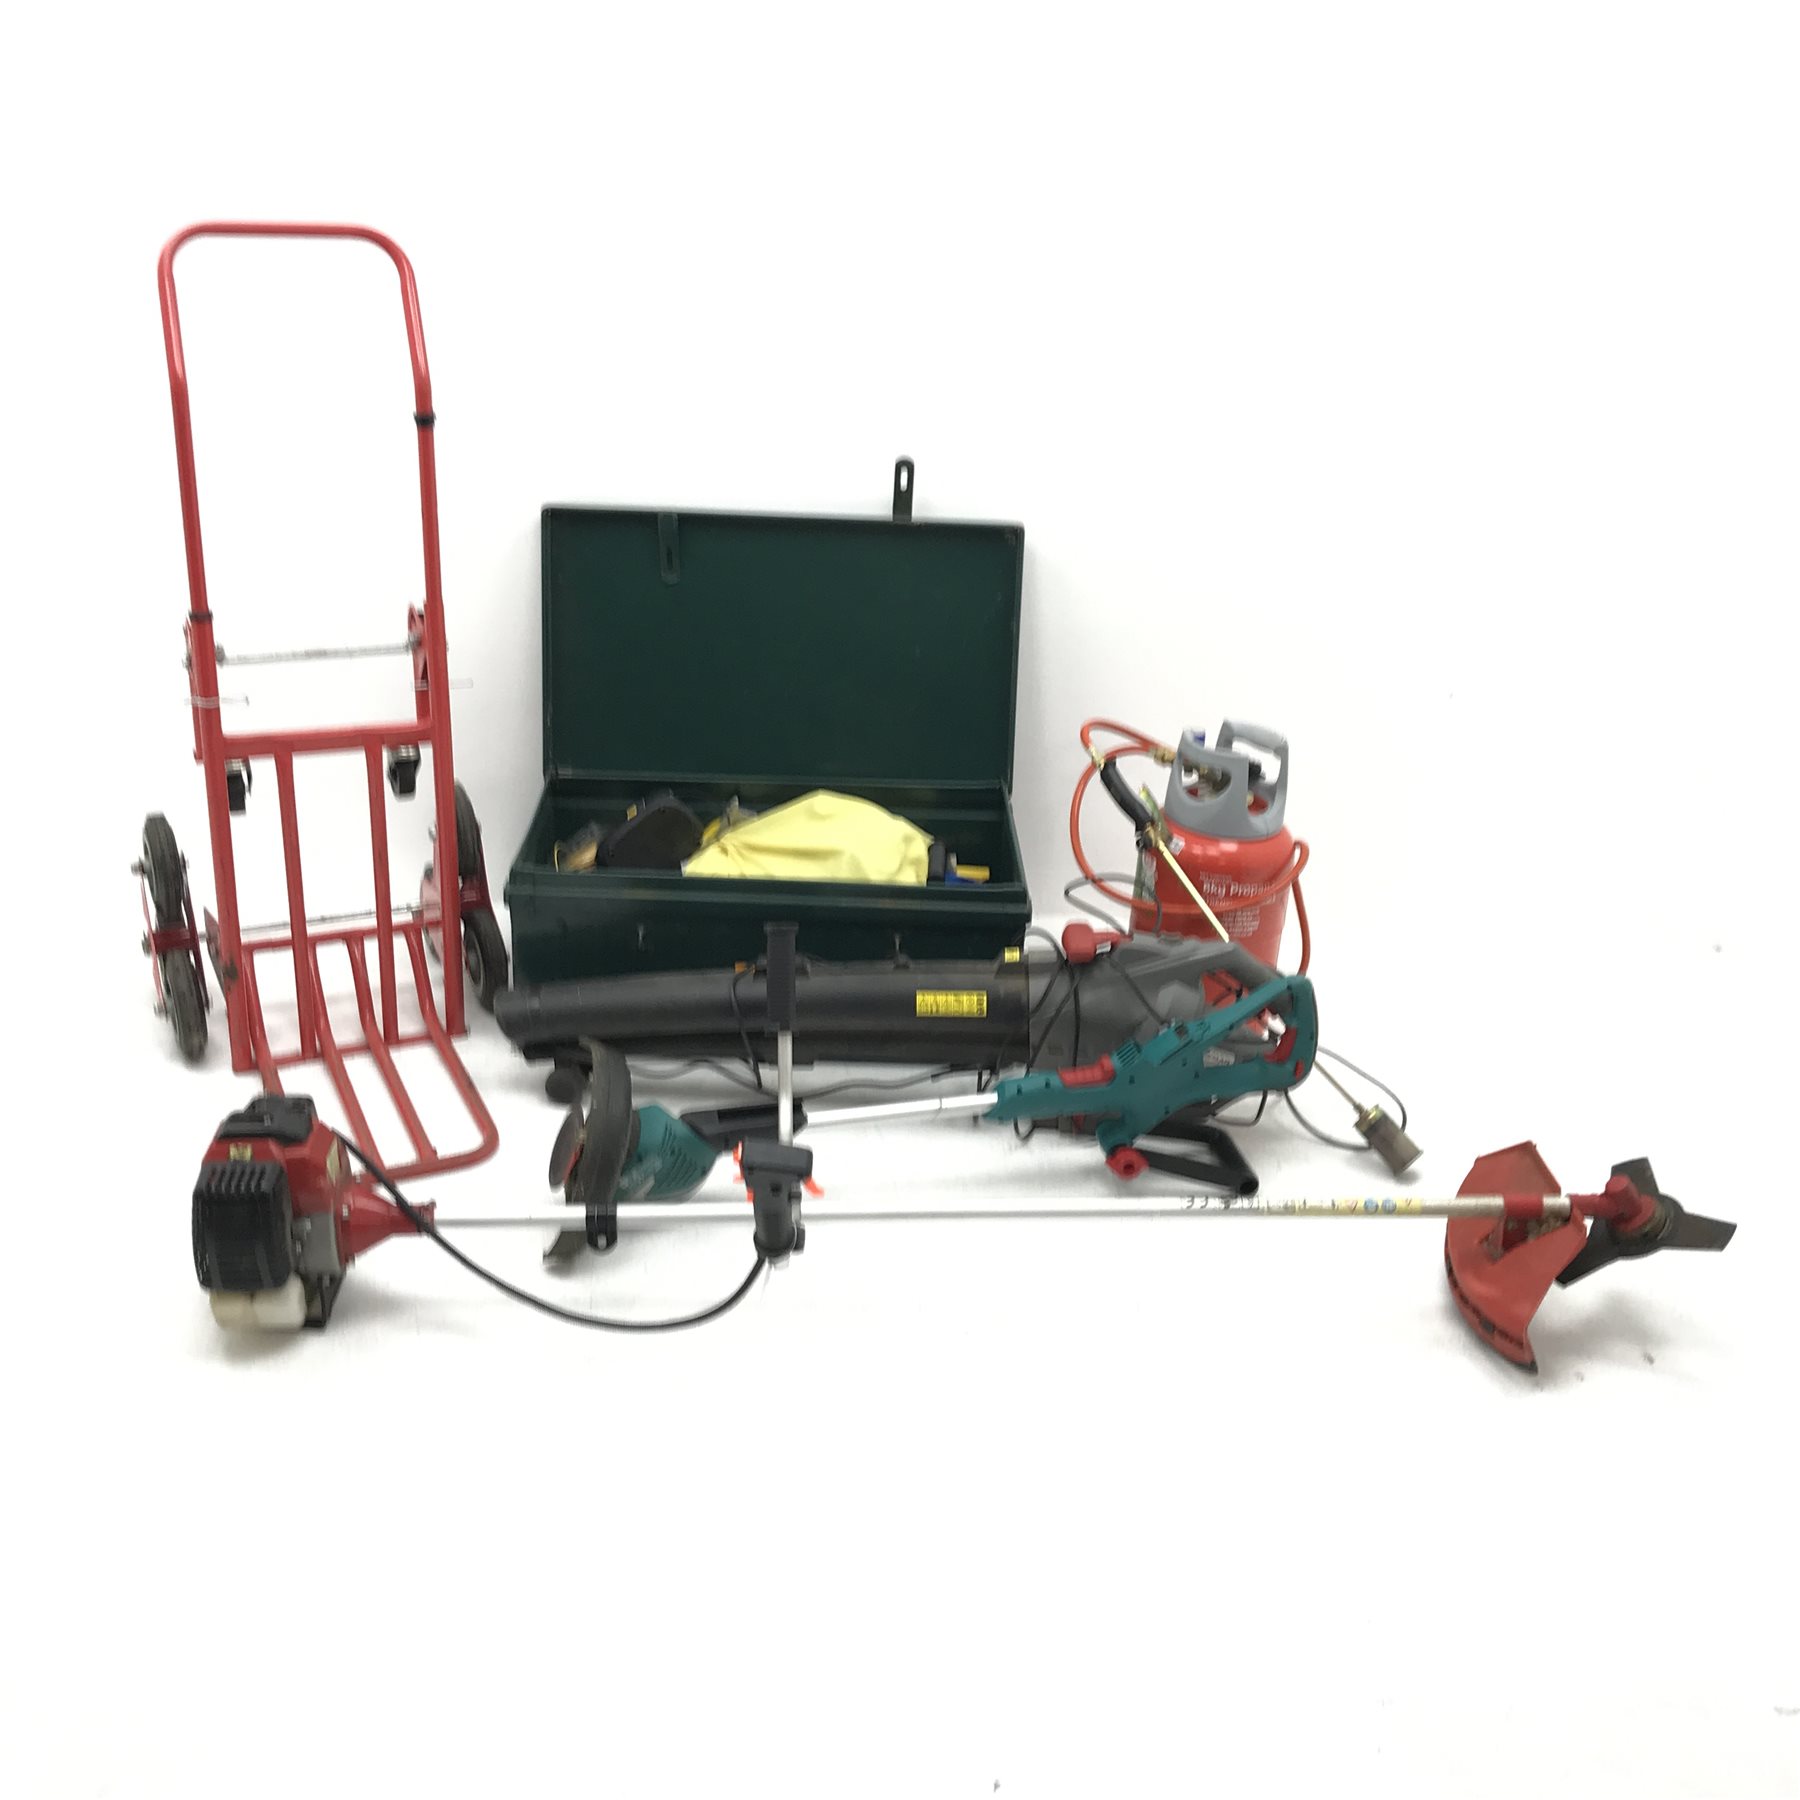 ST-BC415B strimmer, a leaf blow, gas blow torch, sack barrow, two tier ladders, and other tools - Image 2 of 2